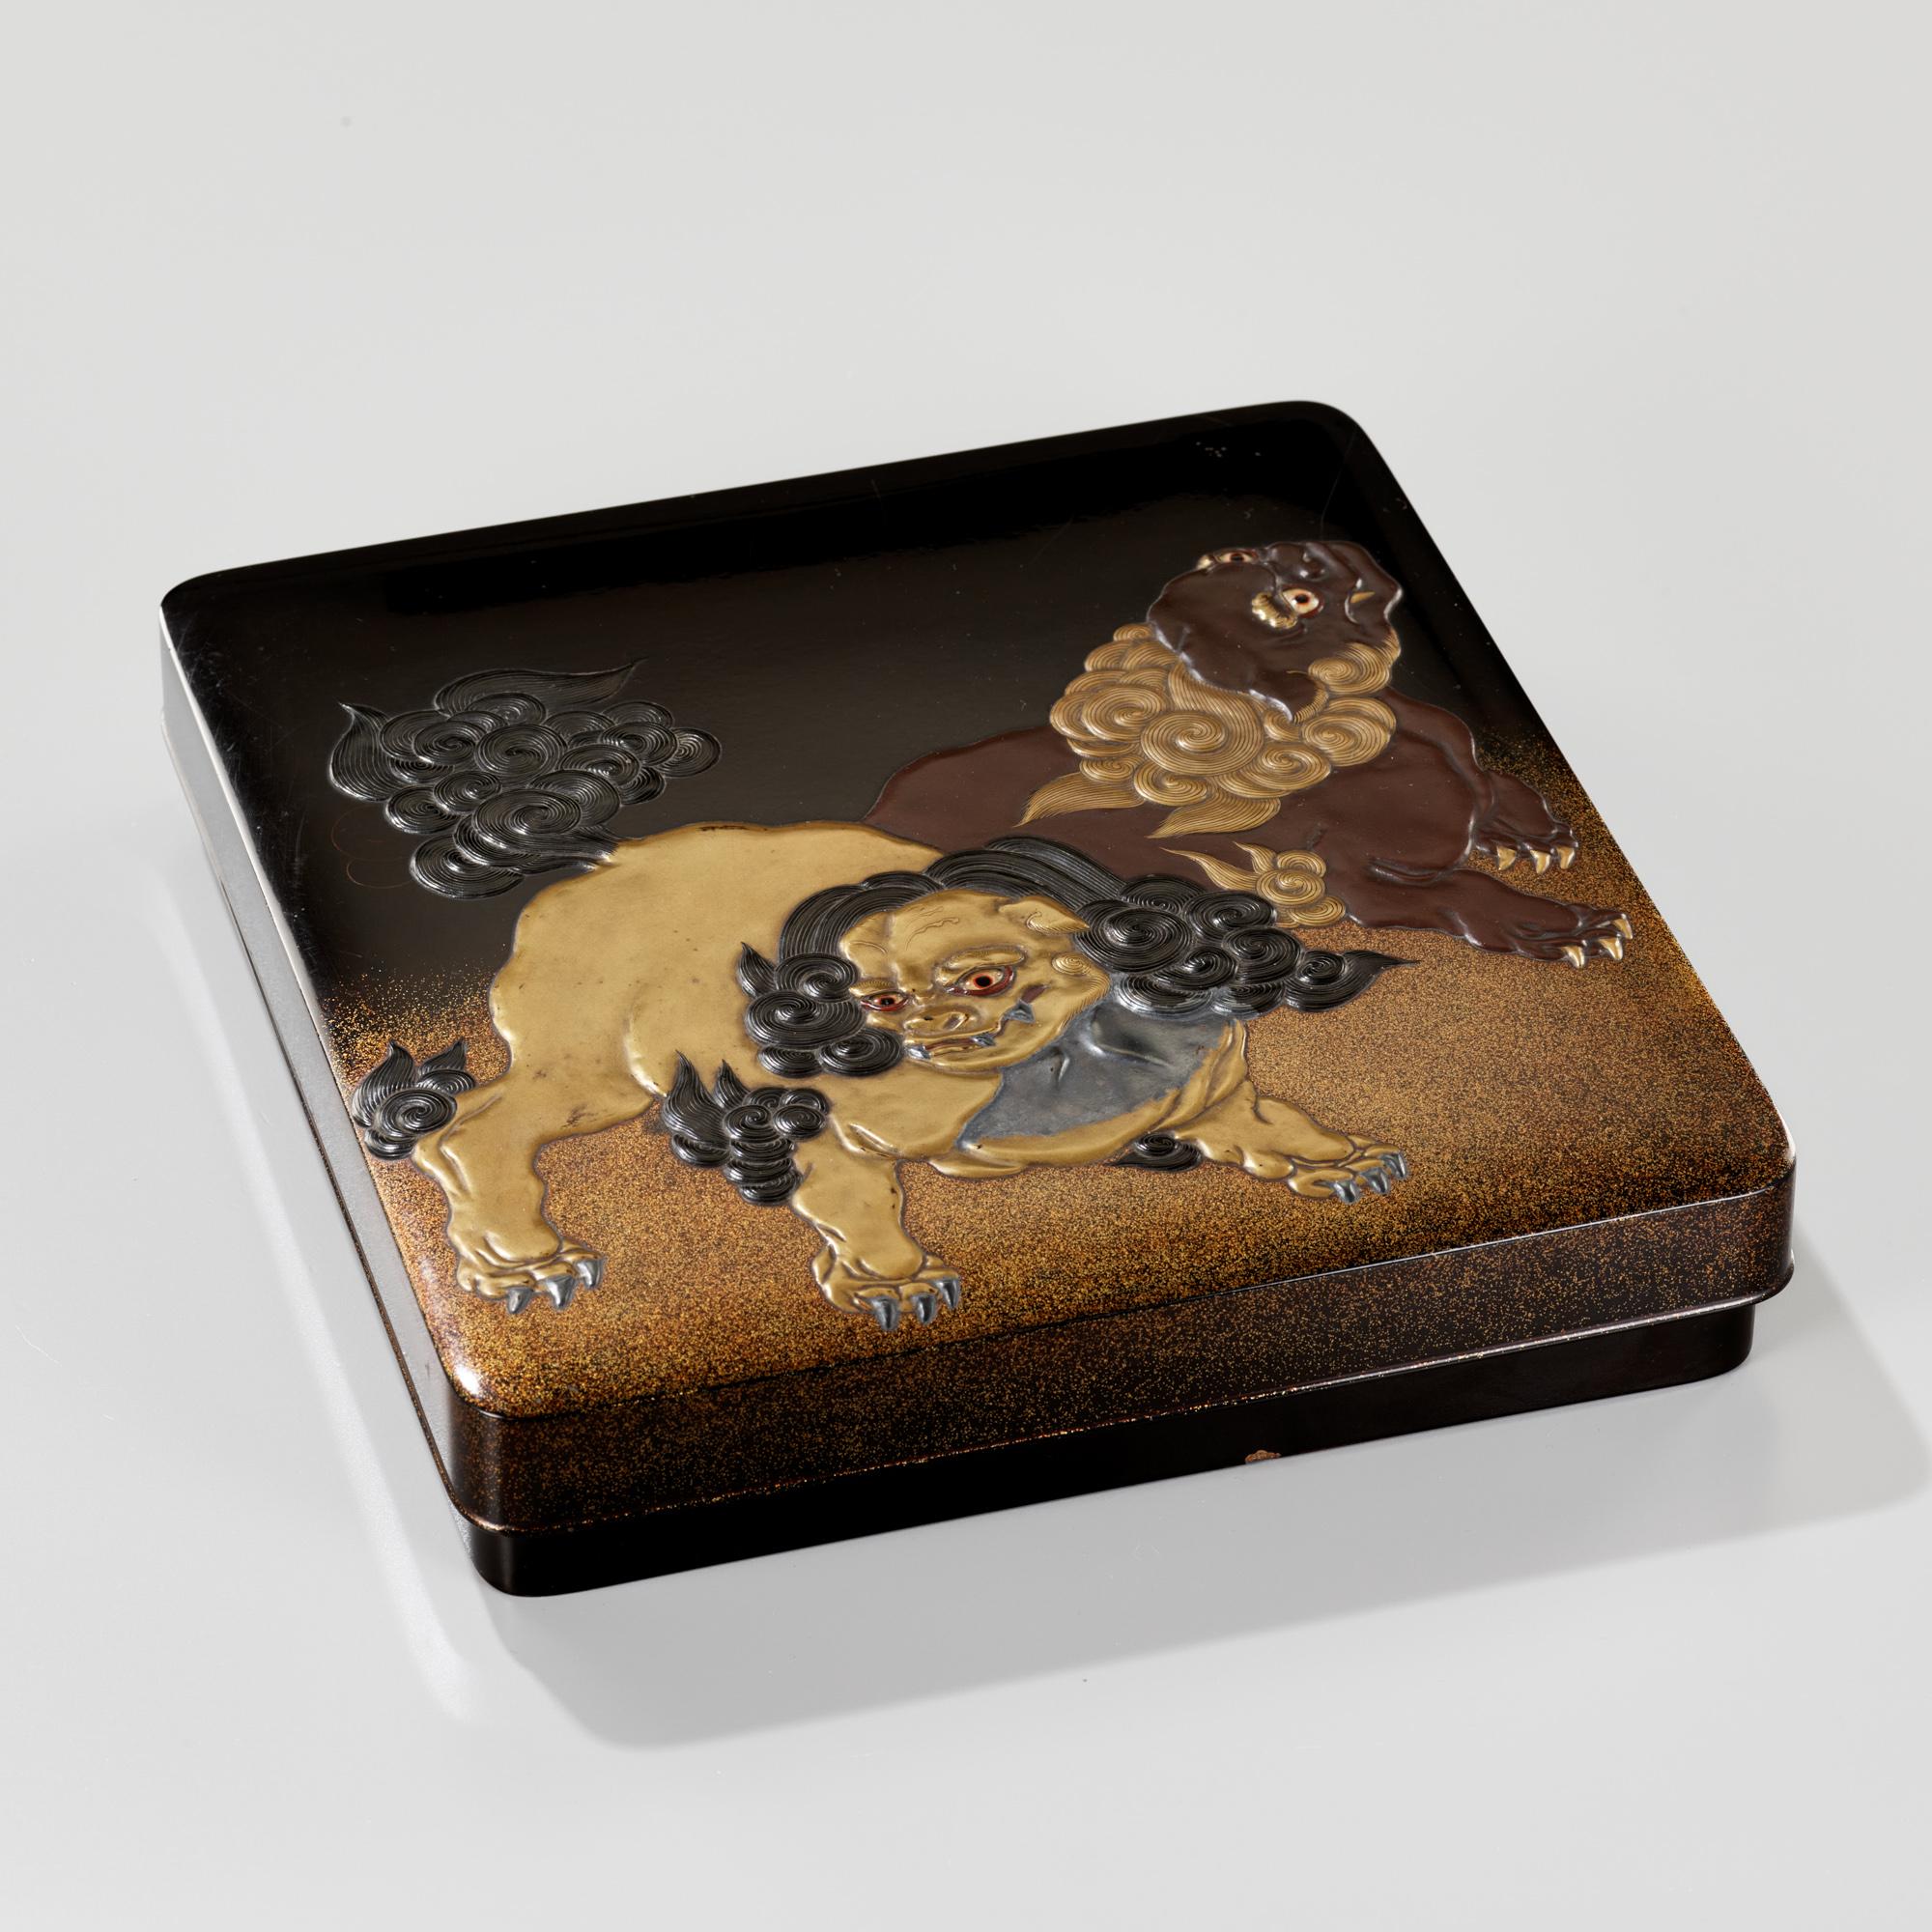 A captivating lacquer suzuri’bako (writing box) of rounded rectangular form depicting a pair of shishi (temple lions) and the lucky god Hotei 布袋 on a rôiro’urushi (black lacquer) ground. Hotei is the god of contentment and happiness, guardian of